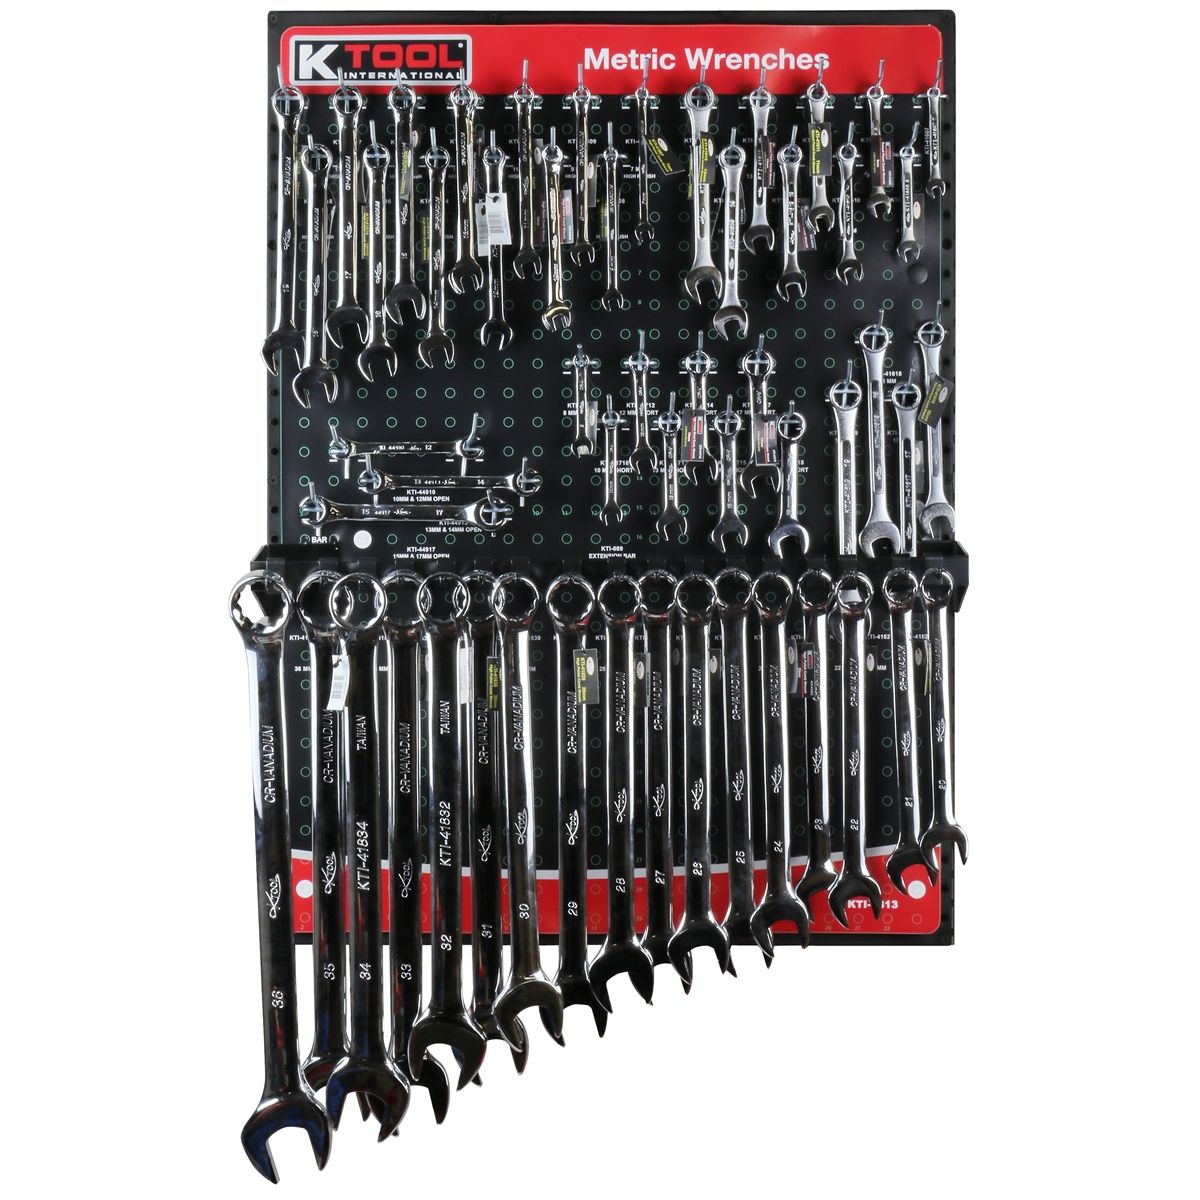 METRIC WRENCHES DISPLAY BOARD